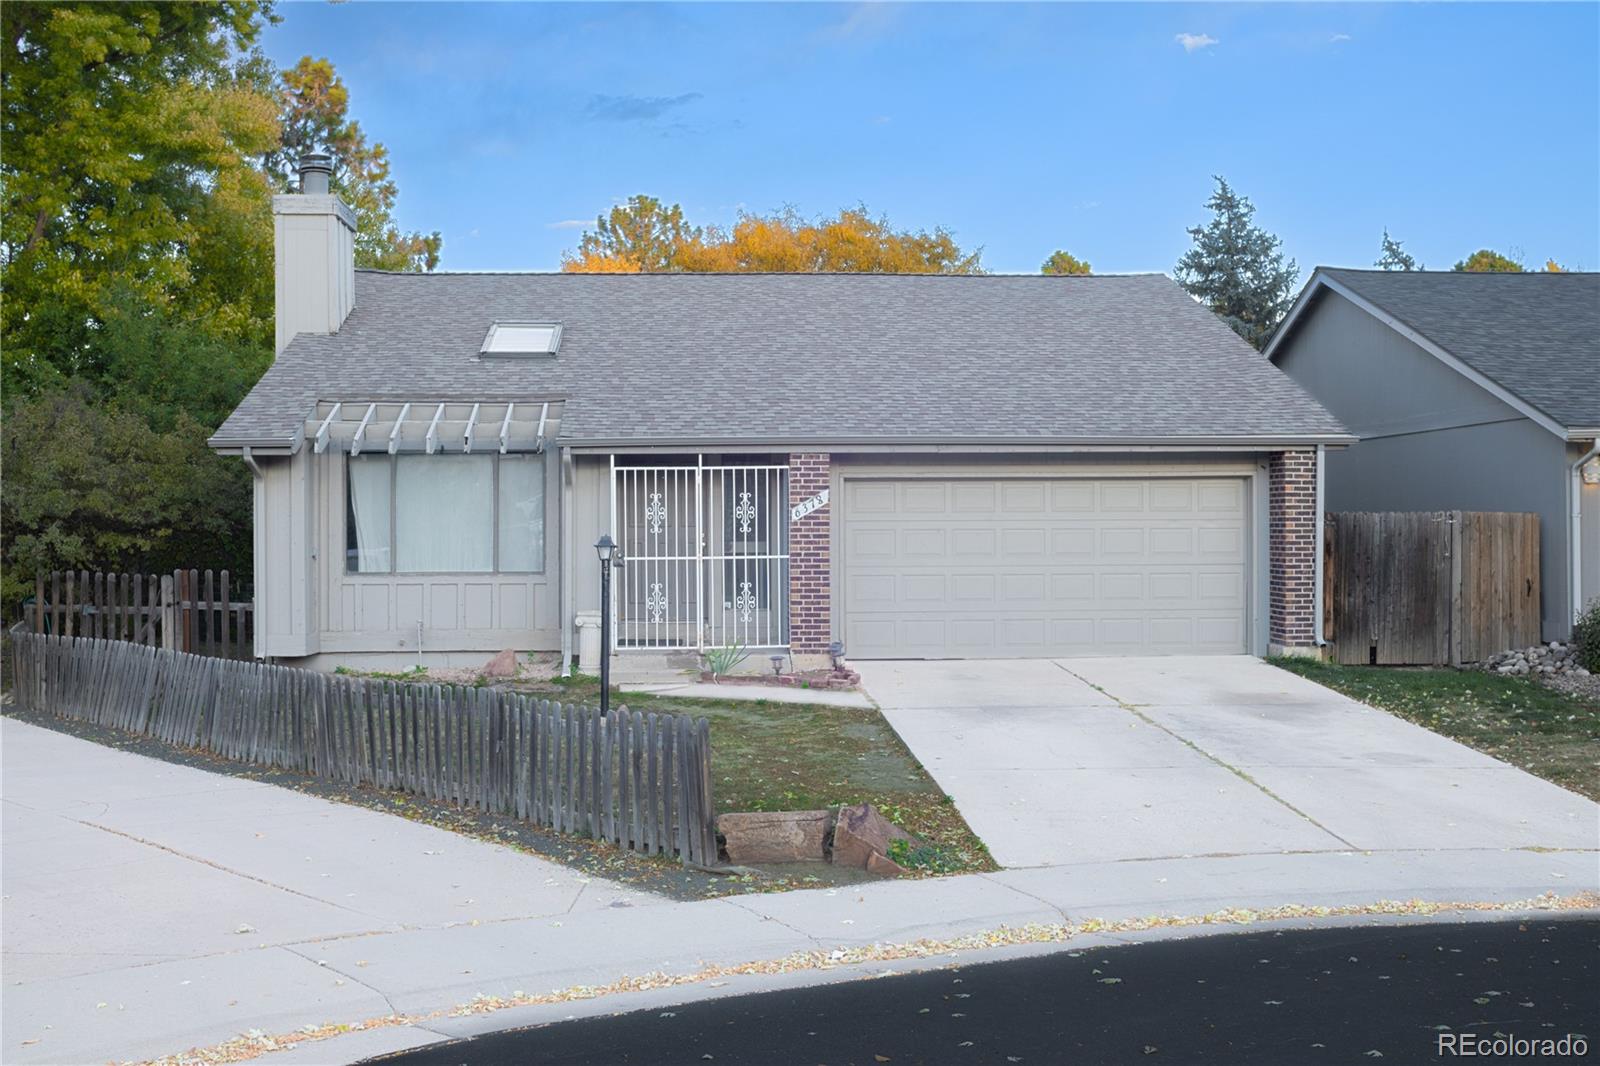 6378 s emporia circle, englewood sold home. Closed on 2023-11-14 for $525,000.